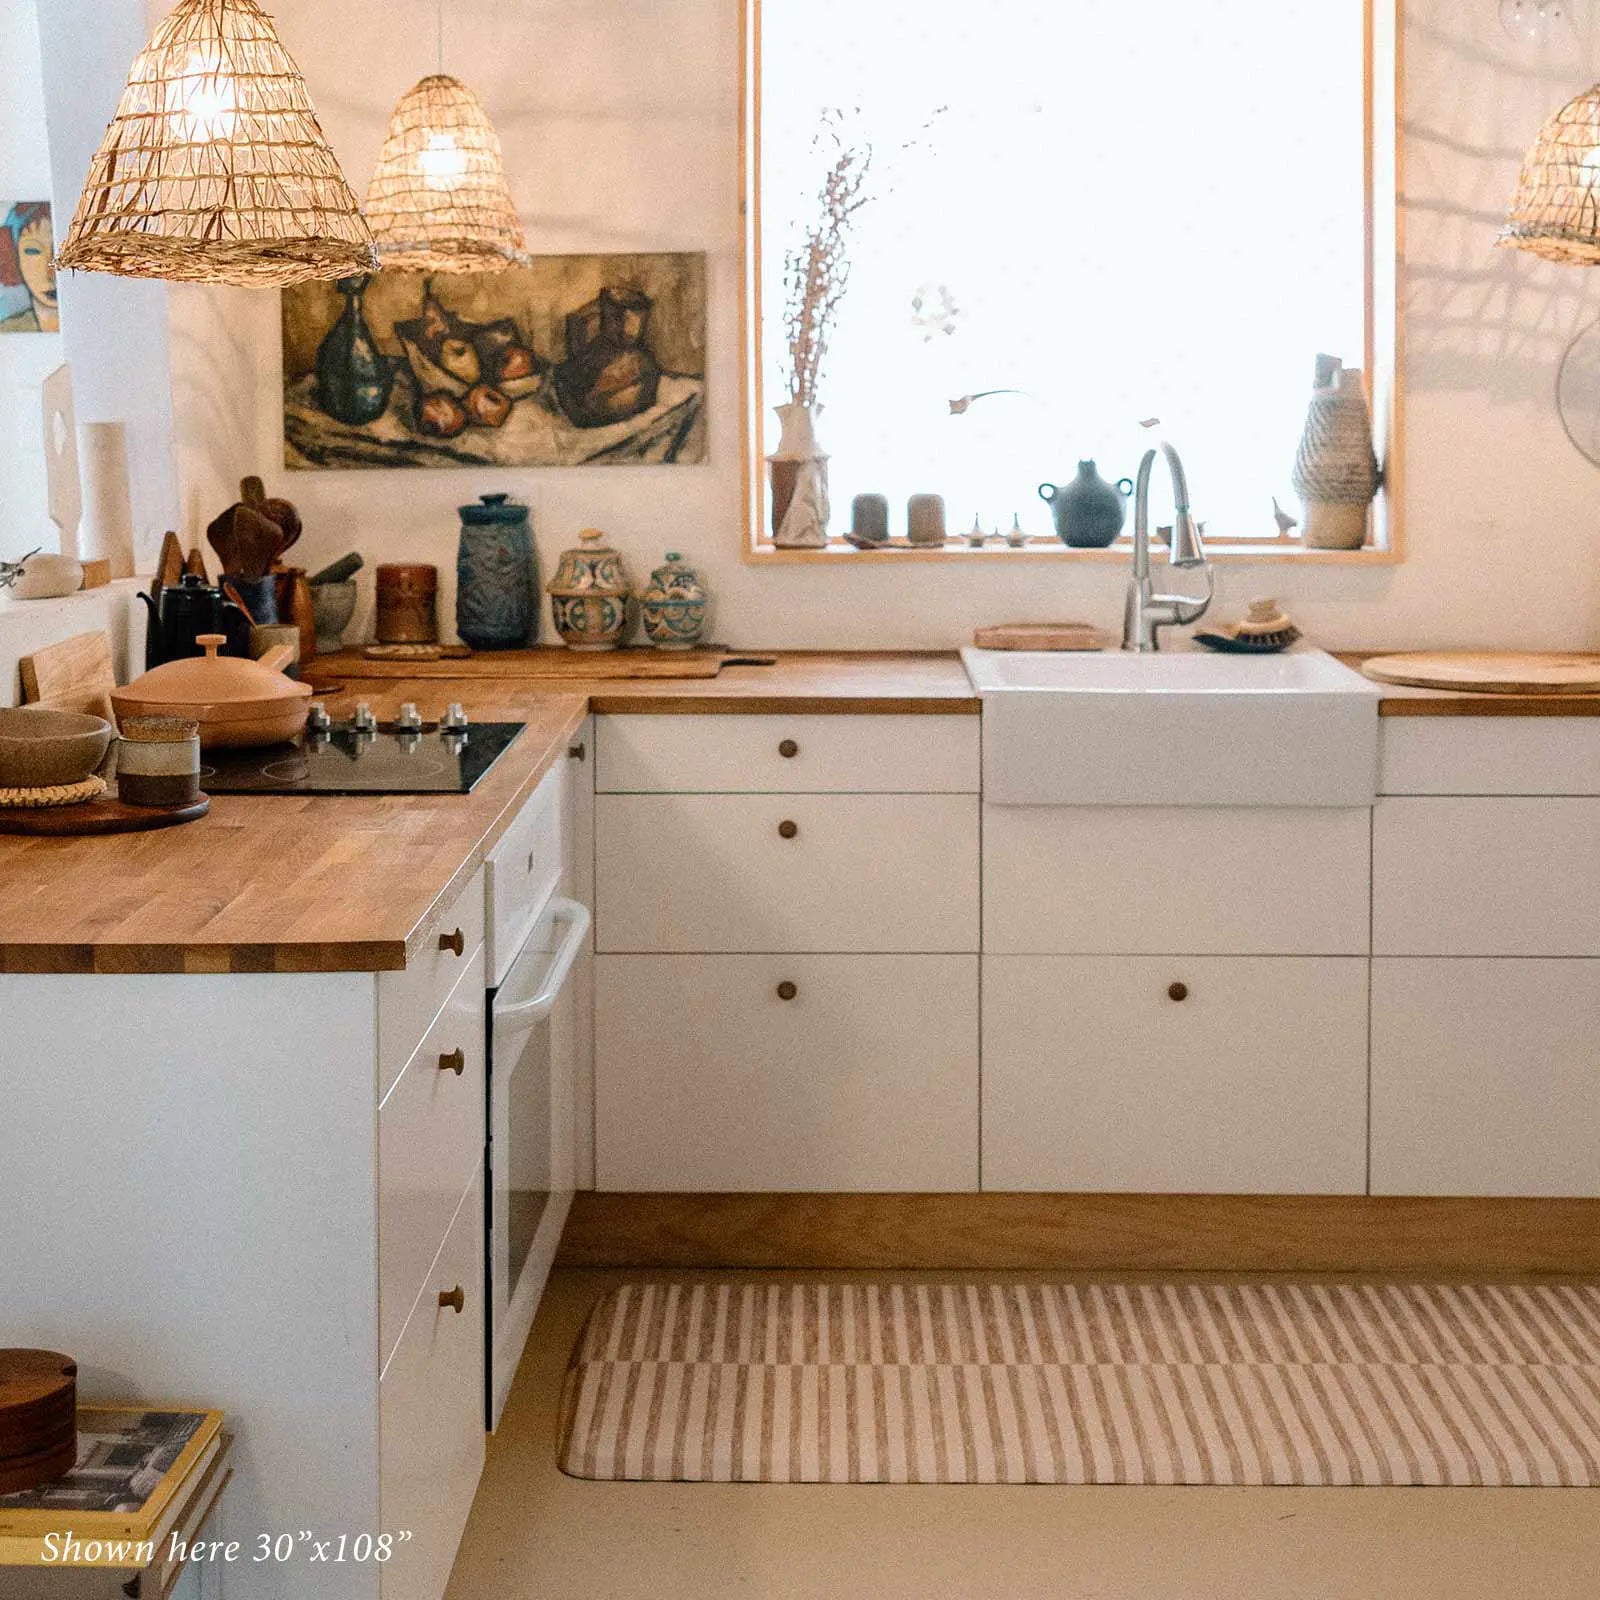 Reese chai beige and white inverted stripe standing mat shown in kitchen in size 30x108